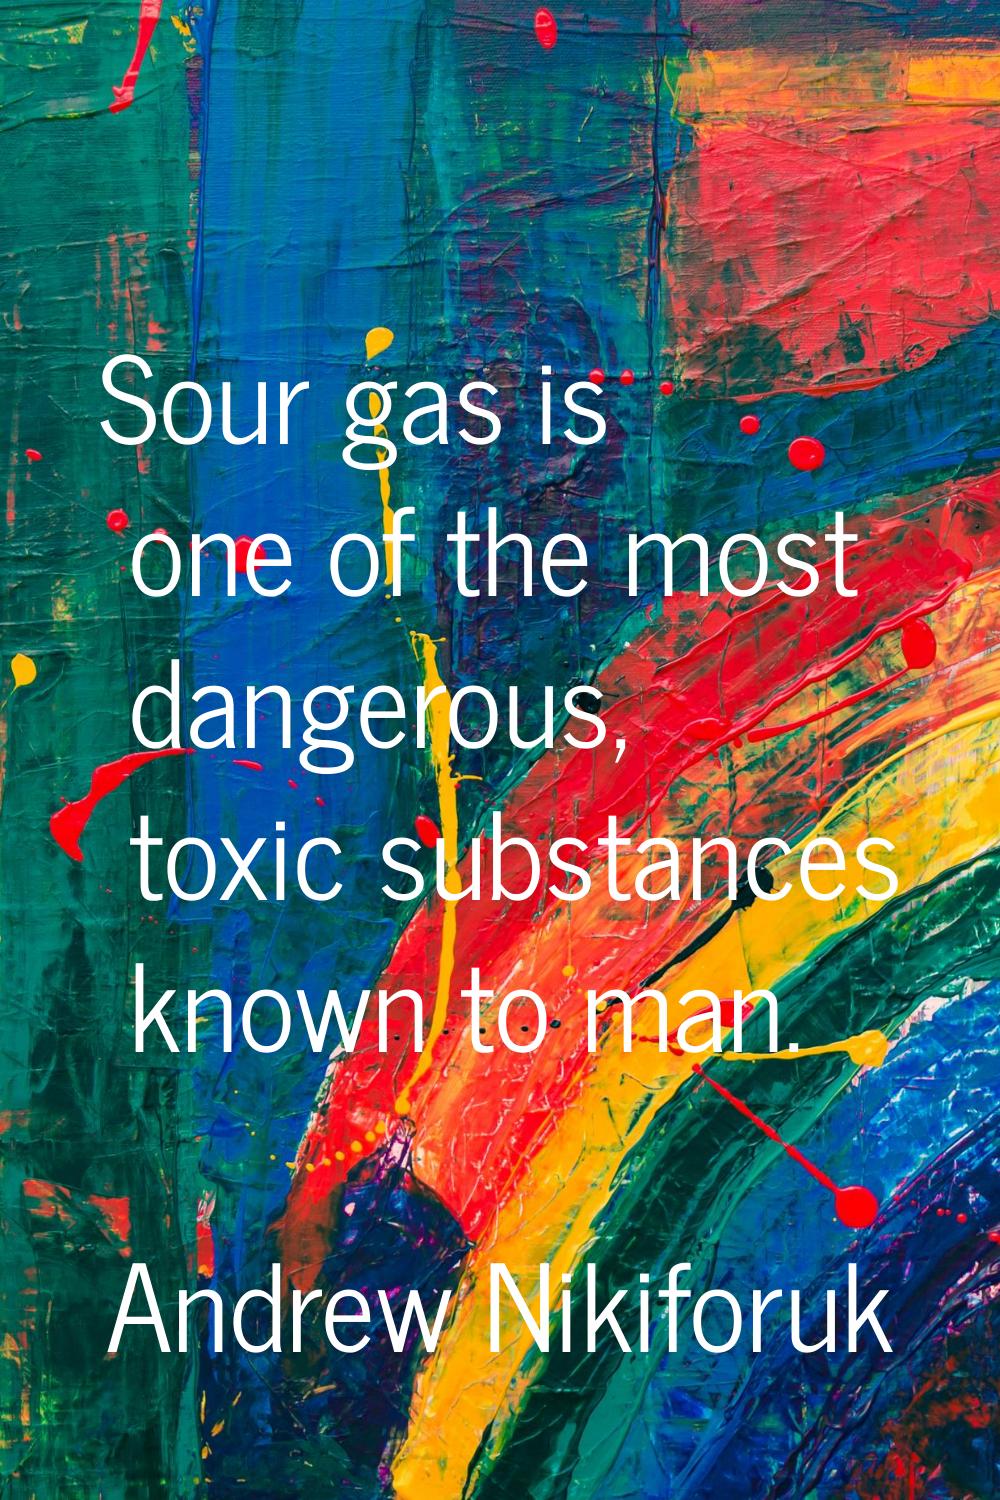 Sour gas is one of the most dangerous, toxic substances known to man.